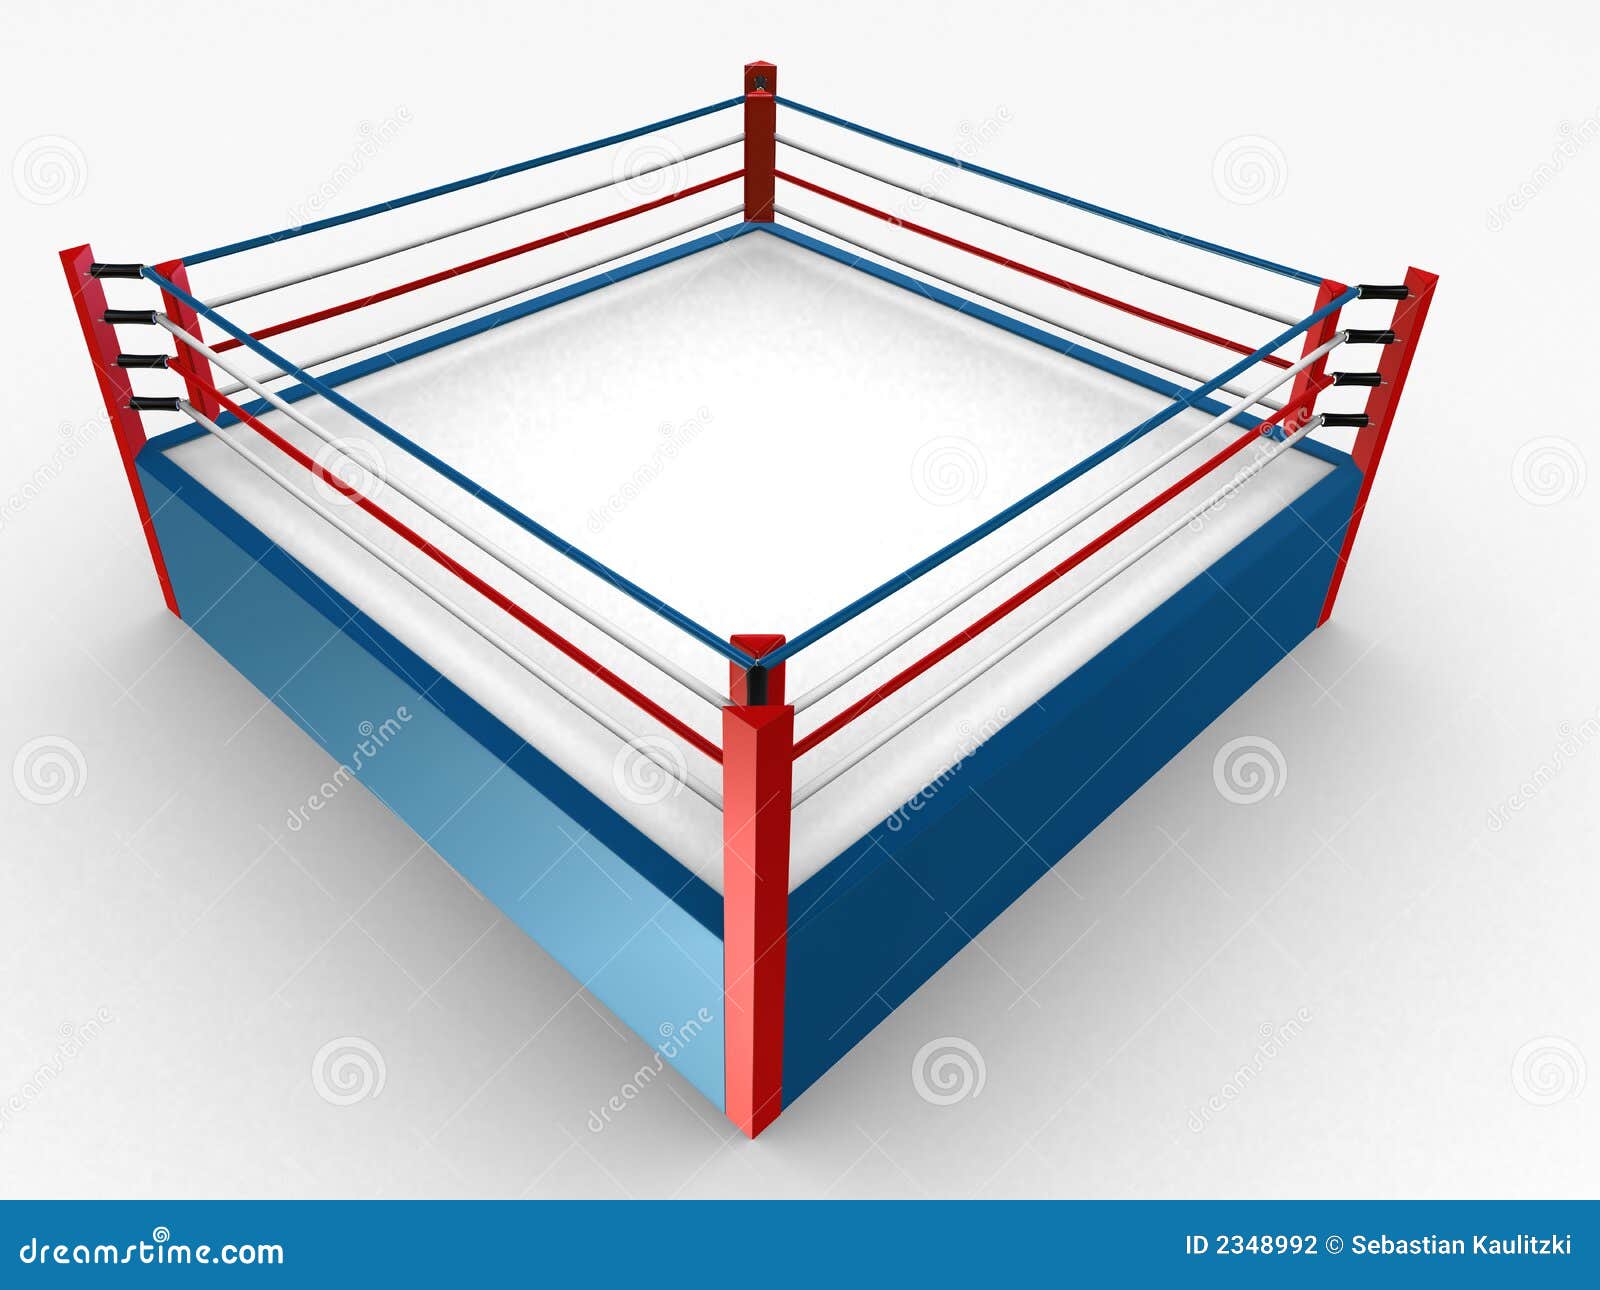 clipart boxing ring - photo #11